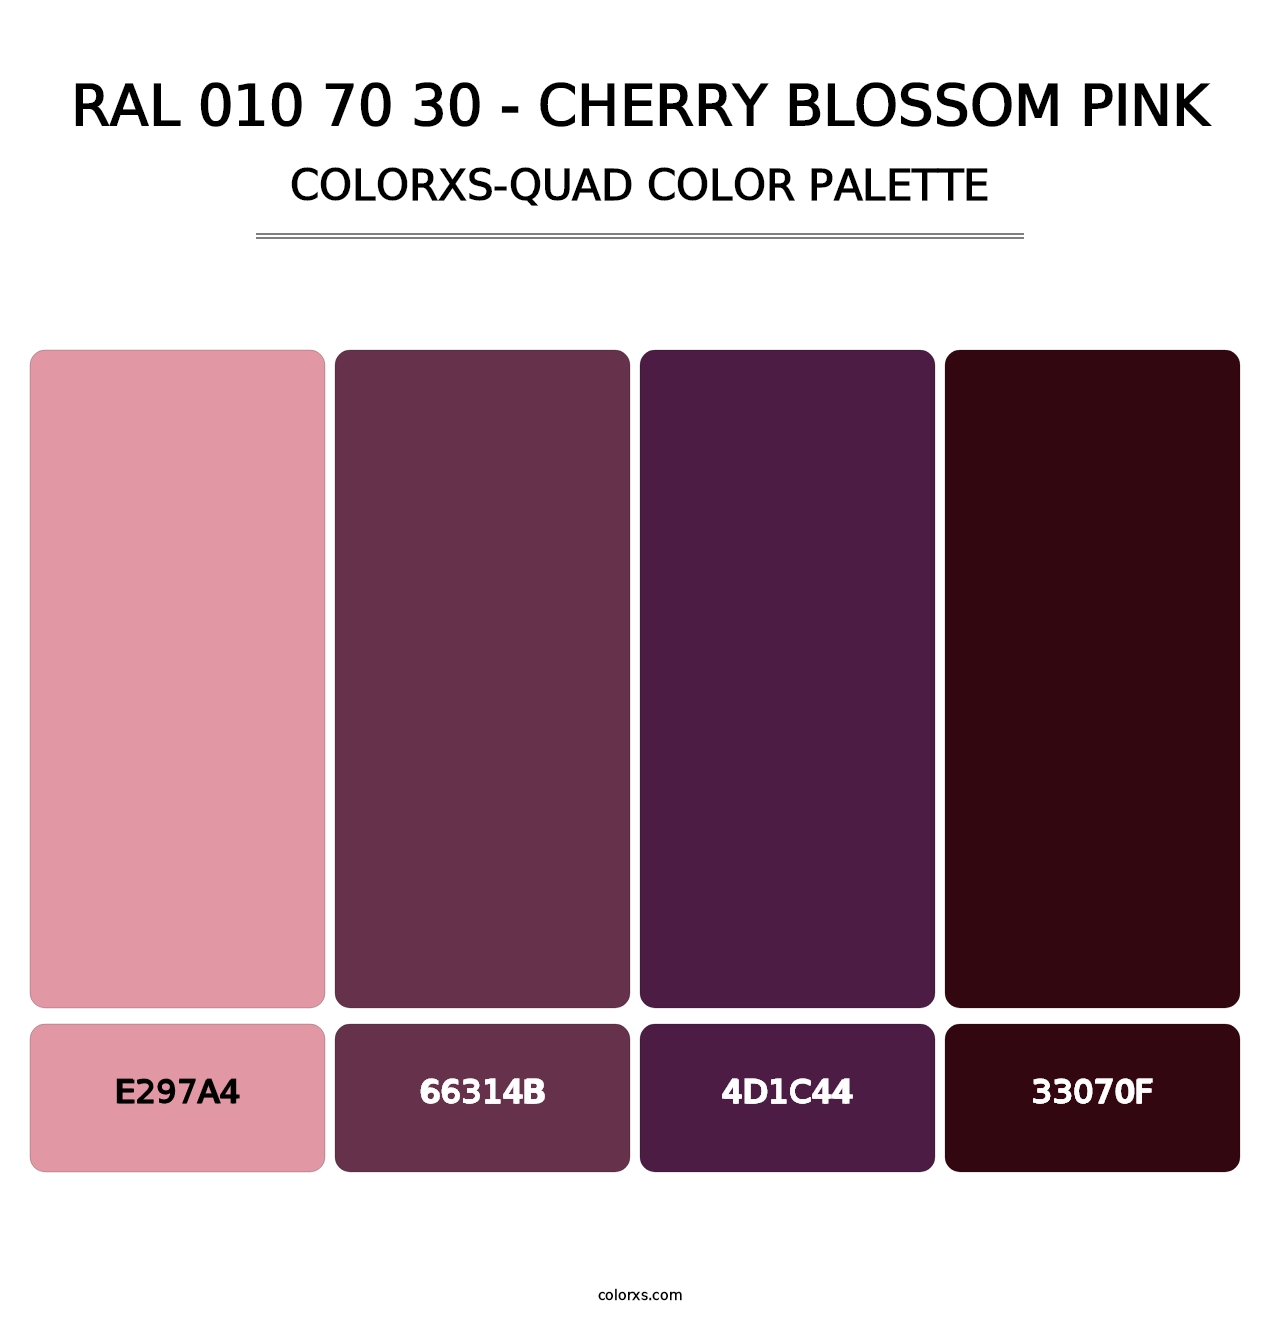 RAL 010 70 30 - Cherry Blossom Pink - Colorxs Quad Palette